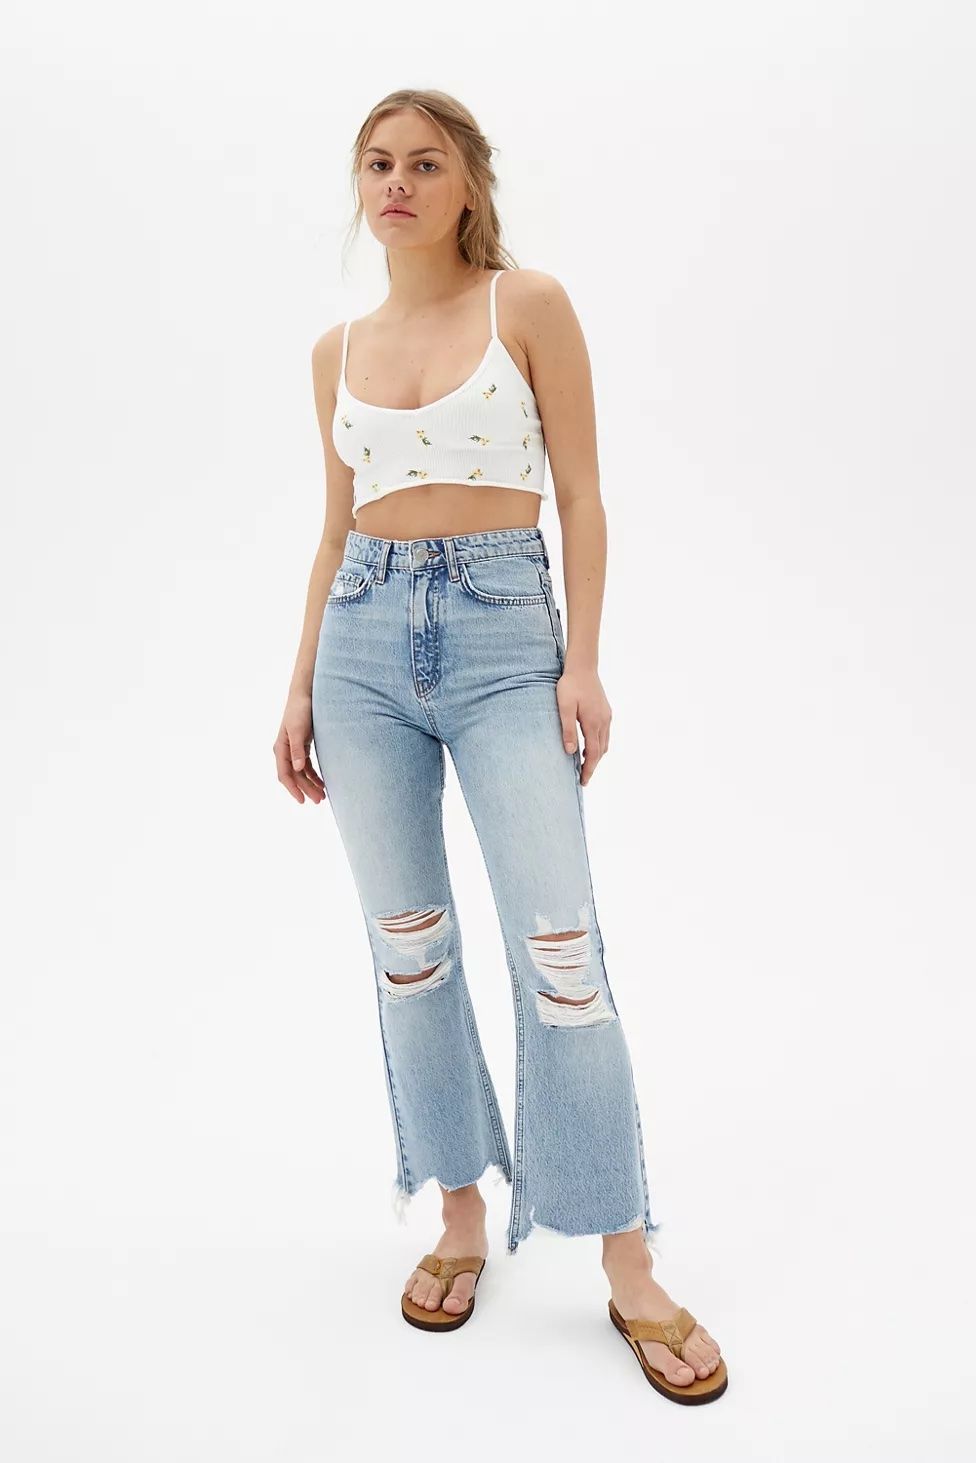 Buy High Waist Jeans Elastic Loose Pants For Women Boyfriend Jeans Women  Plus Size Denim Pants Femme at affordable prices — free shipping, real  reviews with photos — Joom